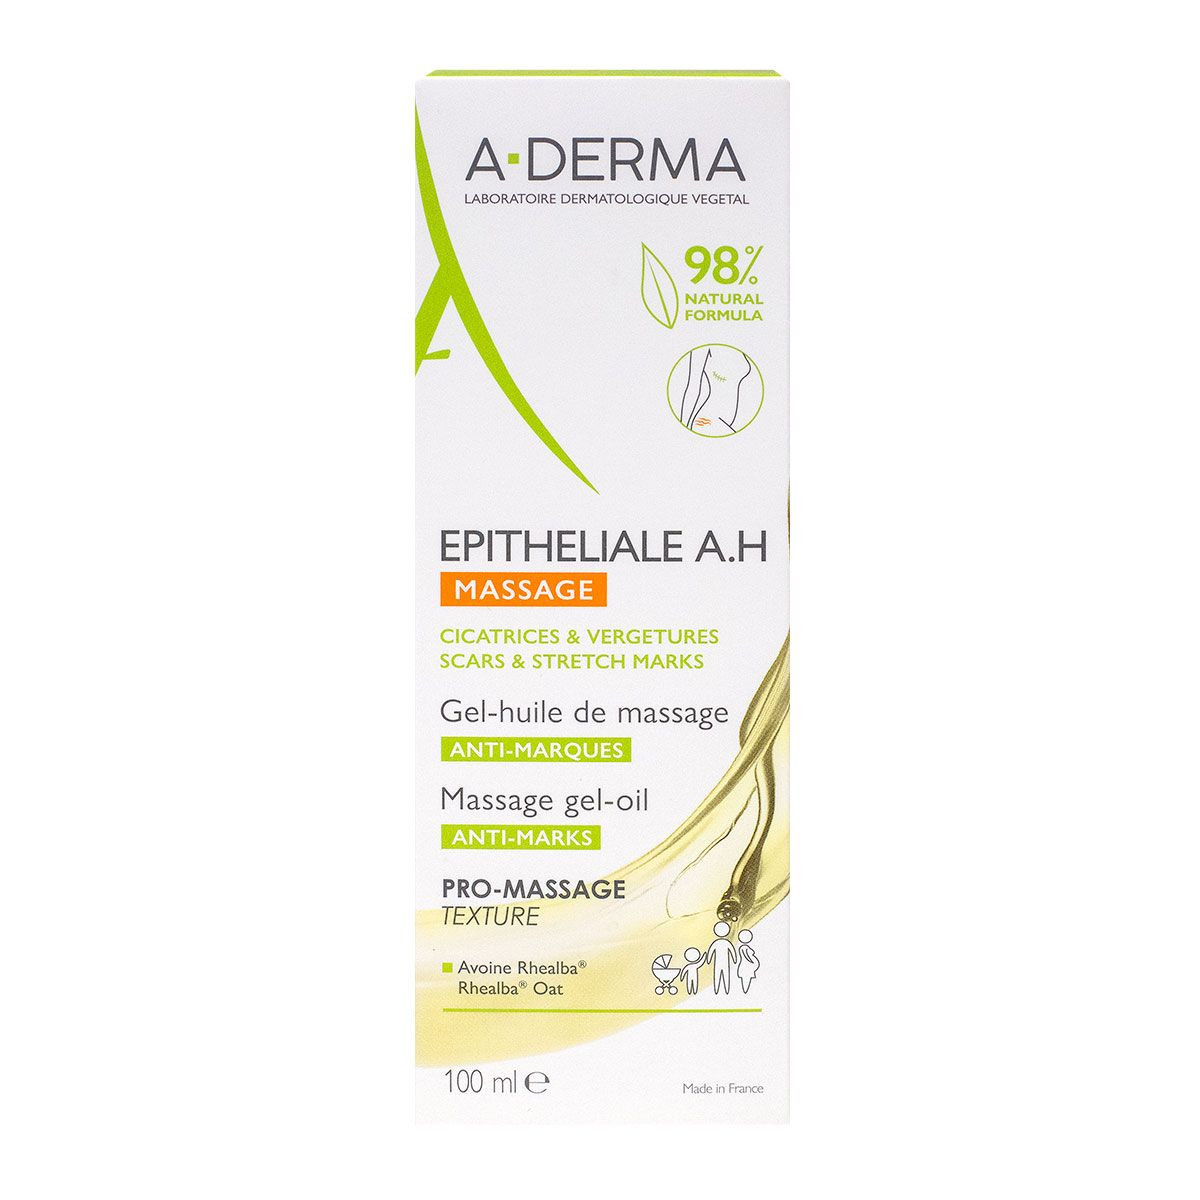 ADERMA Epitheliale AH Duo 100ml - Atténue Cicatrices Vergetures